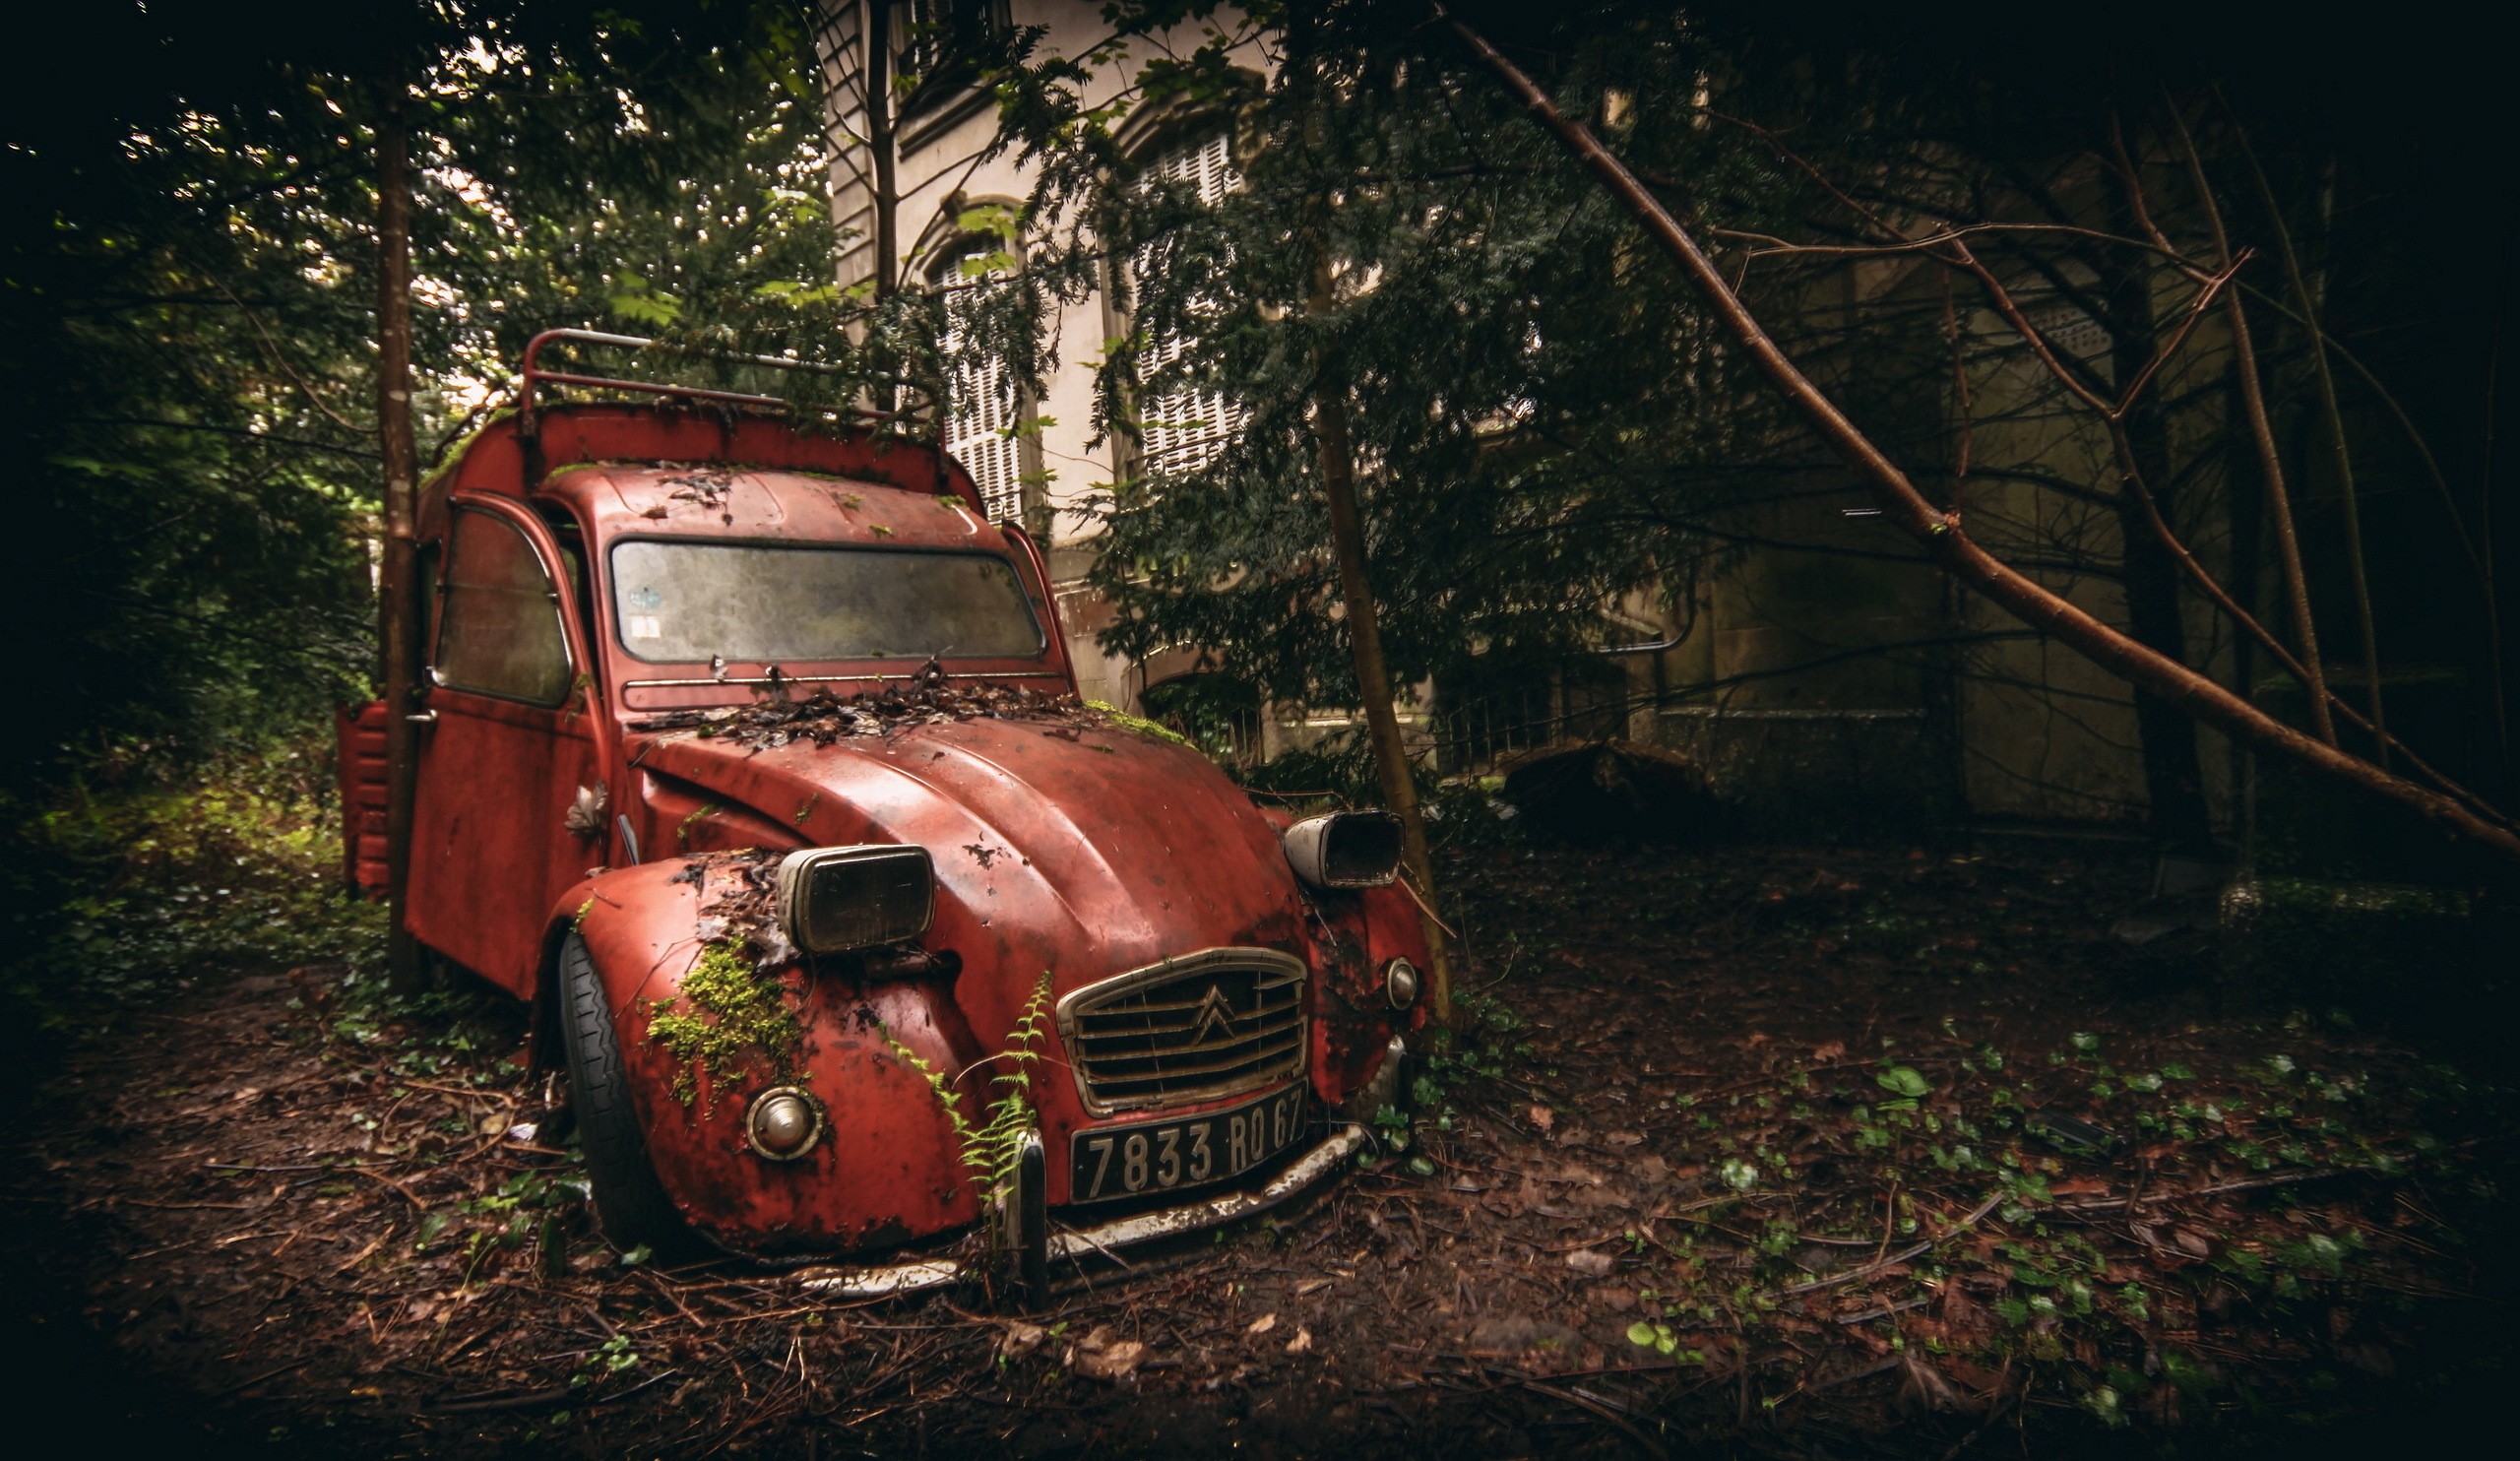 Citroën, Wreck, Red cars, Vehicle Wallpaper